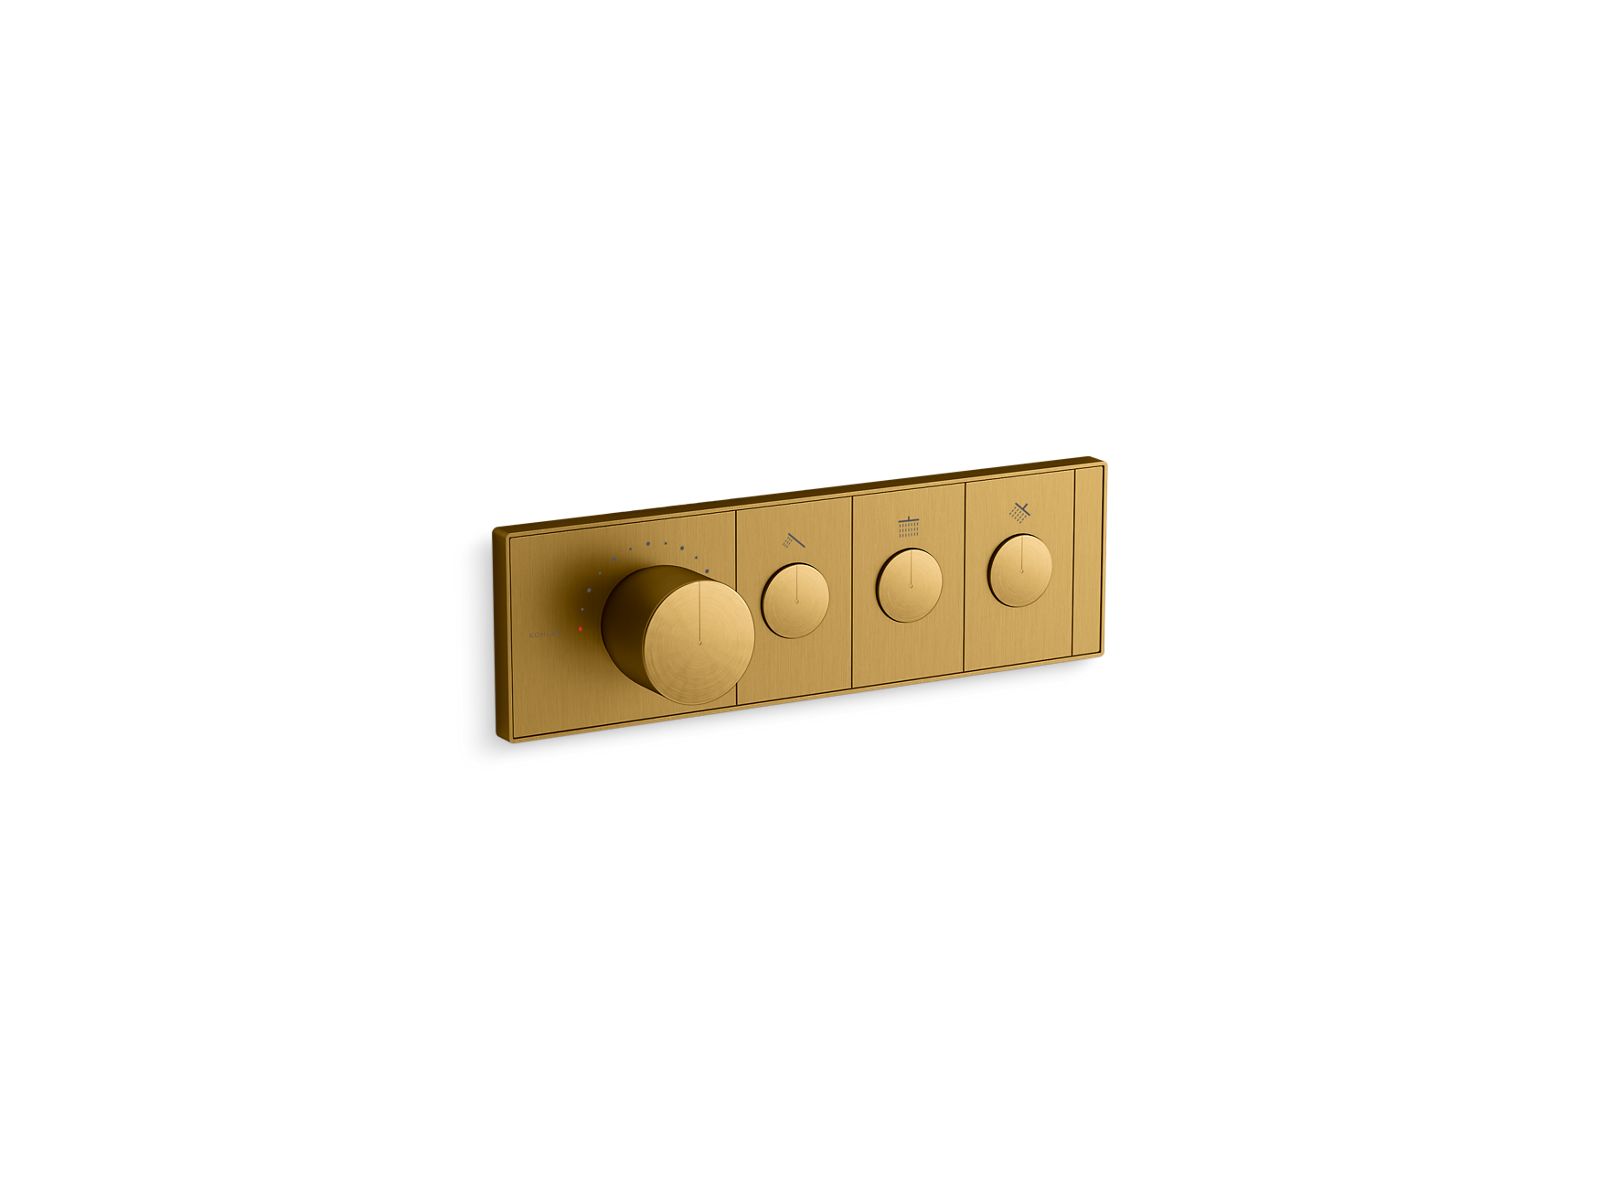 KOHLER K-26347-9 Anthem Three-outlet thermostatic valve control panel with recessed push-buttons